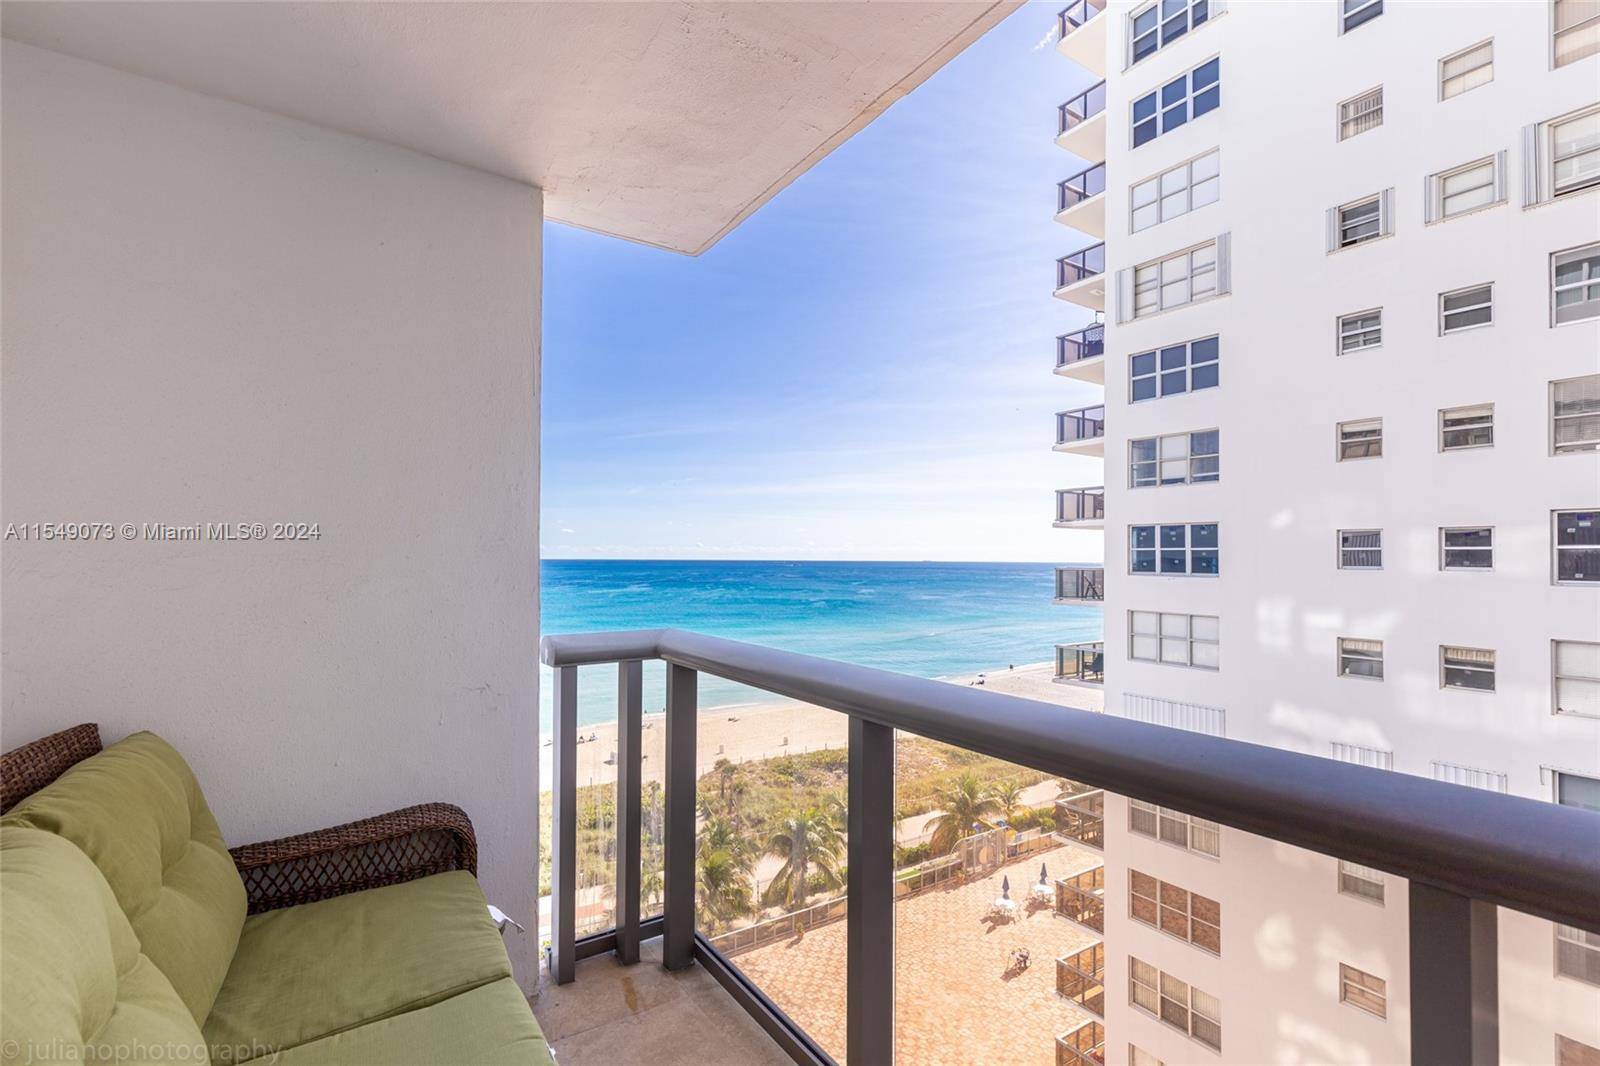 AMAZING OCEAN VIEW FROM THIS BEAUTIFUL 2 BED 2 BATH CONDO !